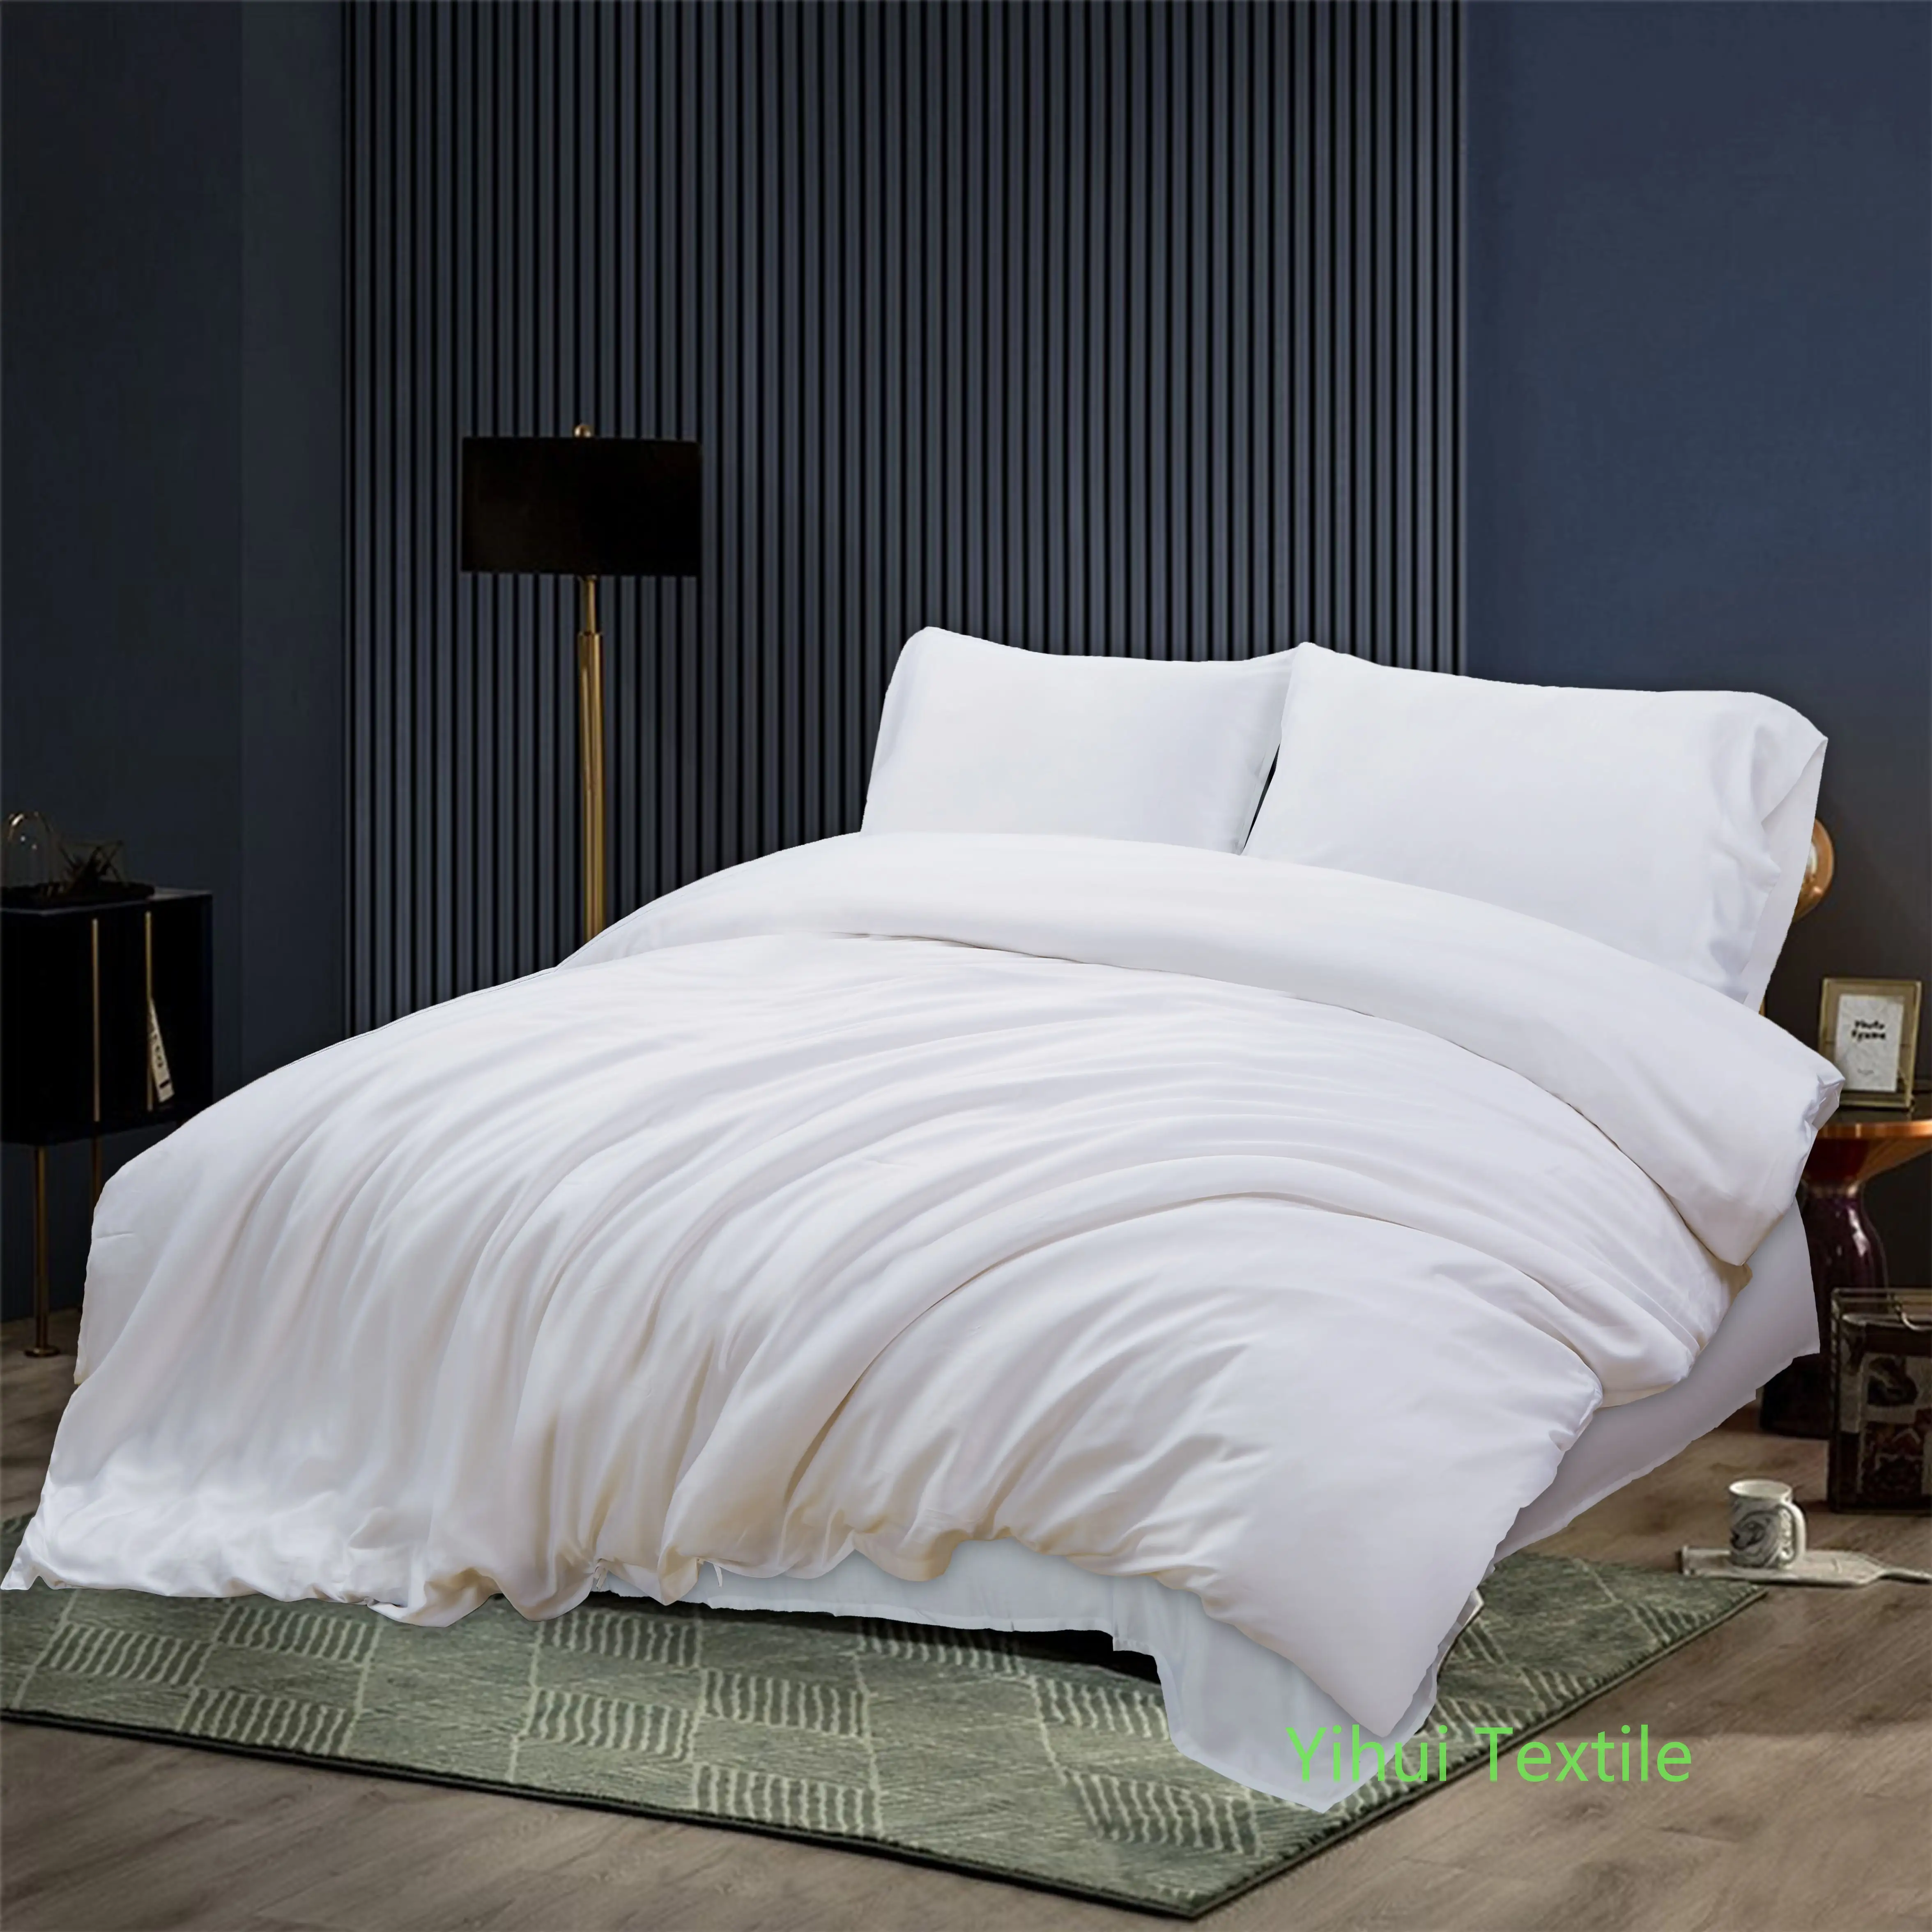 Top Supplier Luxury Bedding Soft And Silky Anti Bacterial Organic Oeko-Tex 100 Bamboo Bed Sheets Set And Bamboo Duvet Cover